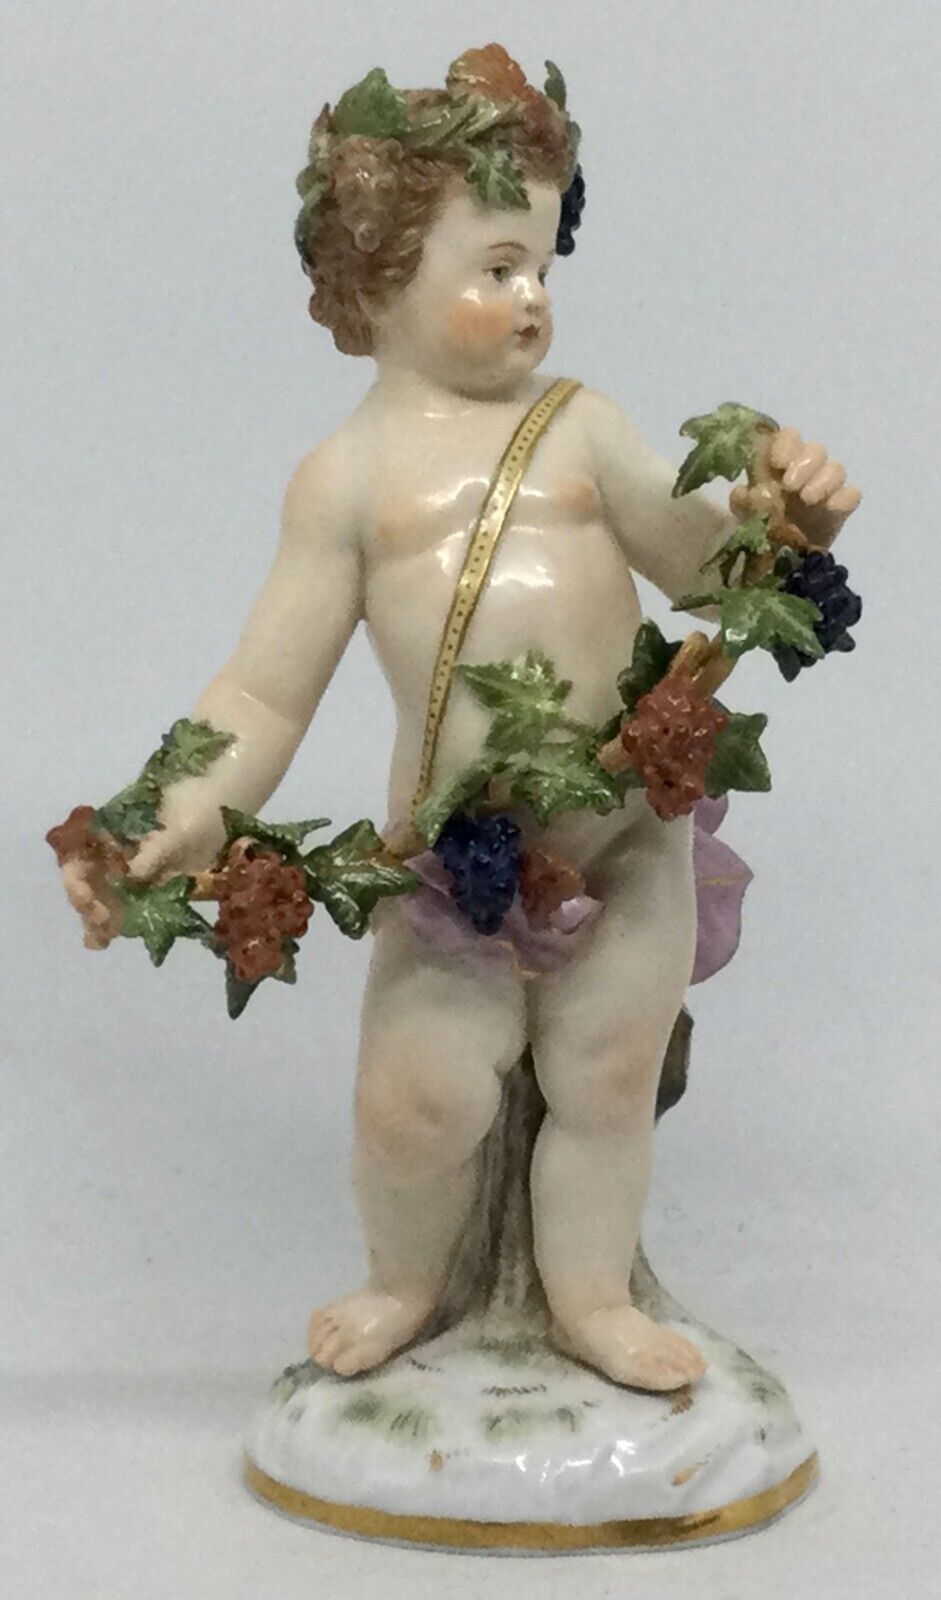 Meissen Porcelain figurine Putto with garland of grapes A69 19th c. [AH1209]